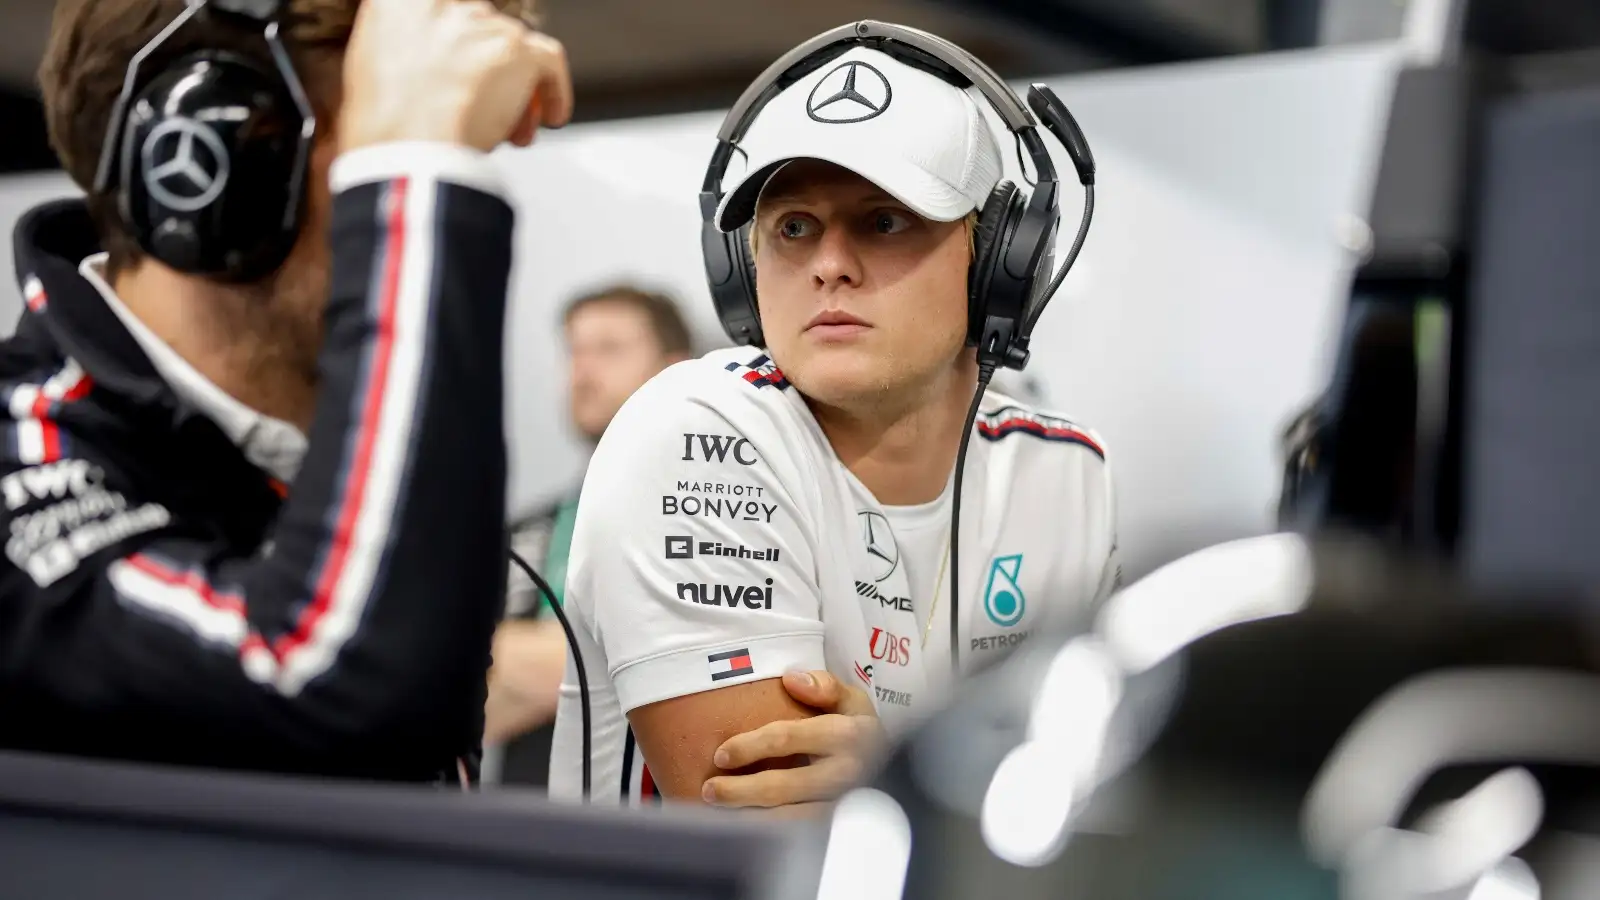 Inspiredlovers Mick-Schumacher-Shatters-Rumors Mick Schumacher coming to America. Mercedes F1 reserve linked with exciting new project Sports  